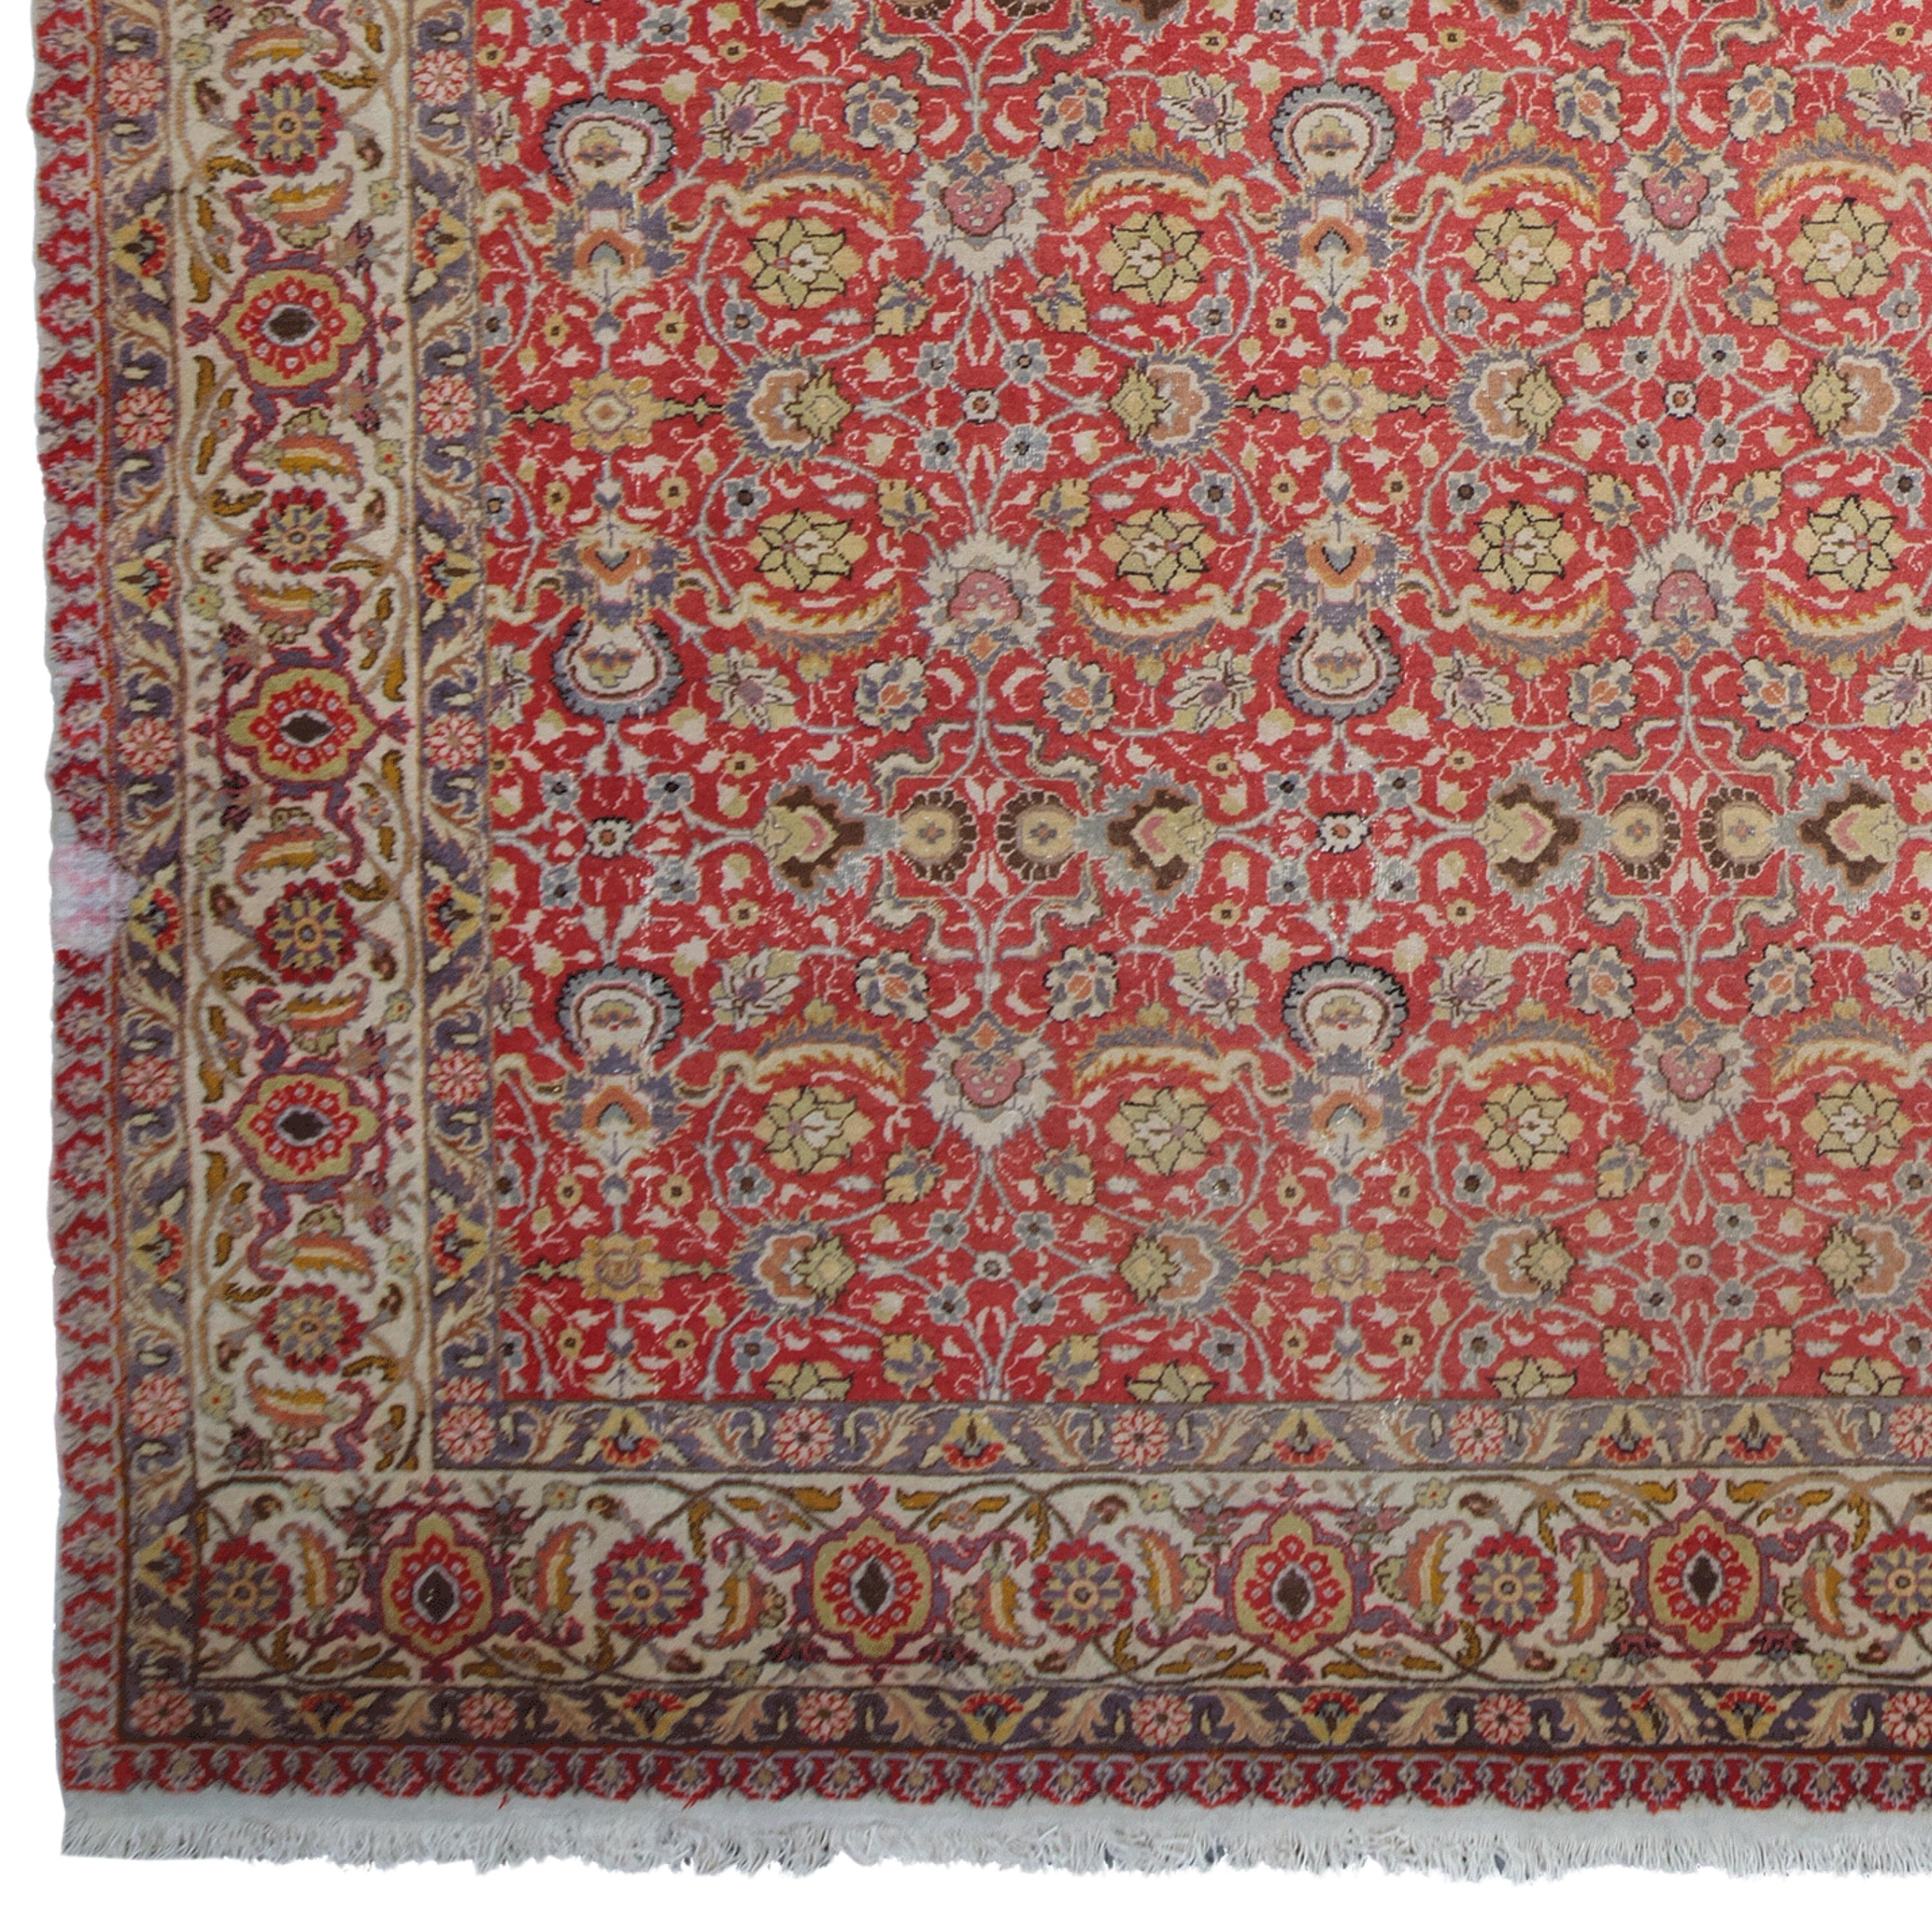 Antique Kayseri Rug - 19th Century Anatolian Rug

This antique Kayseri carpet is a masterpiece that reflects the elegance and artistic richness of the Ottoman period. With its rich red tones, detailed patterns and fine workmanship, this antique